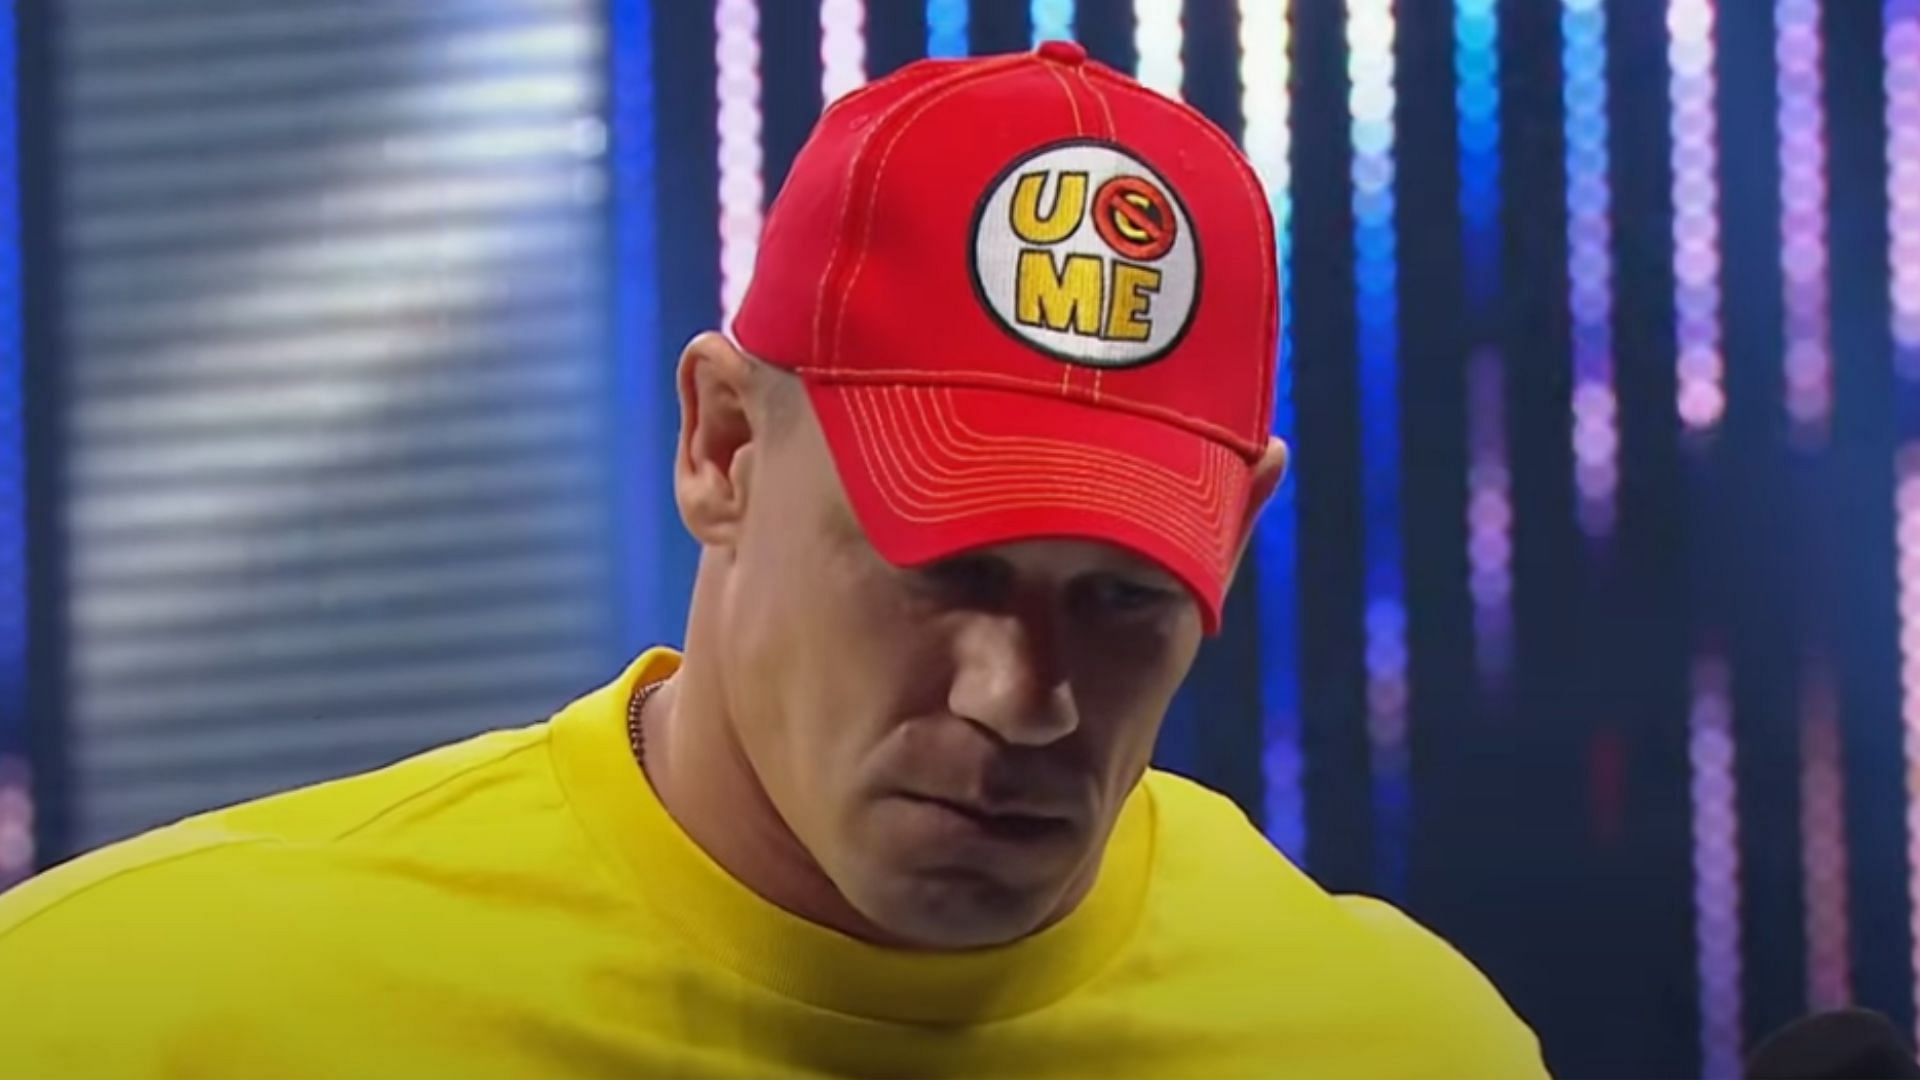 John Cena is considered to be one of WWE